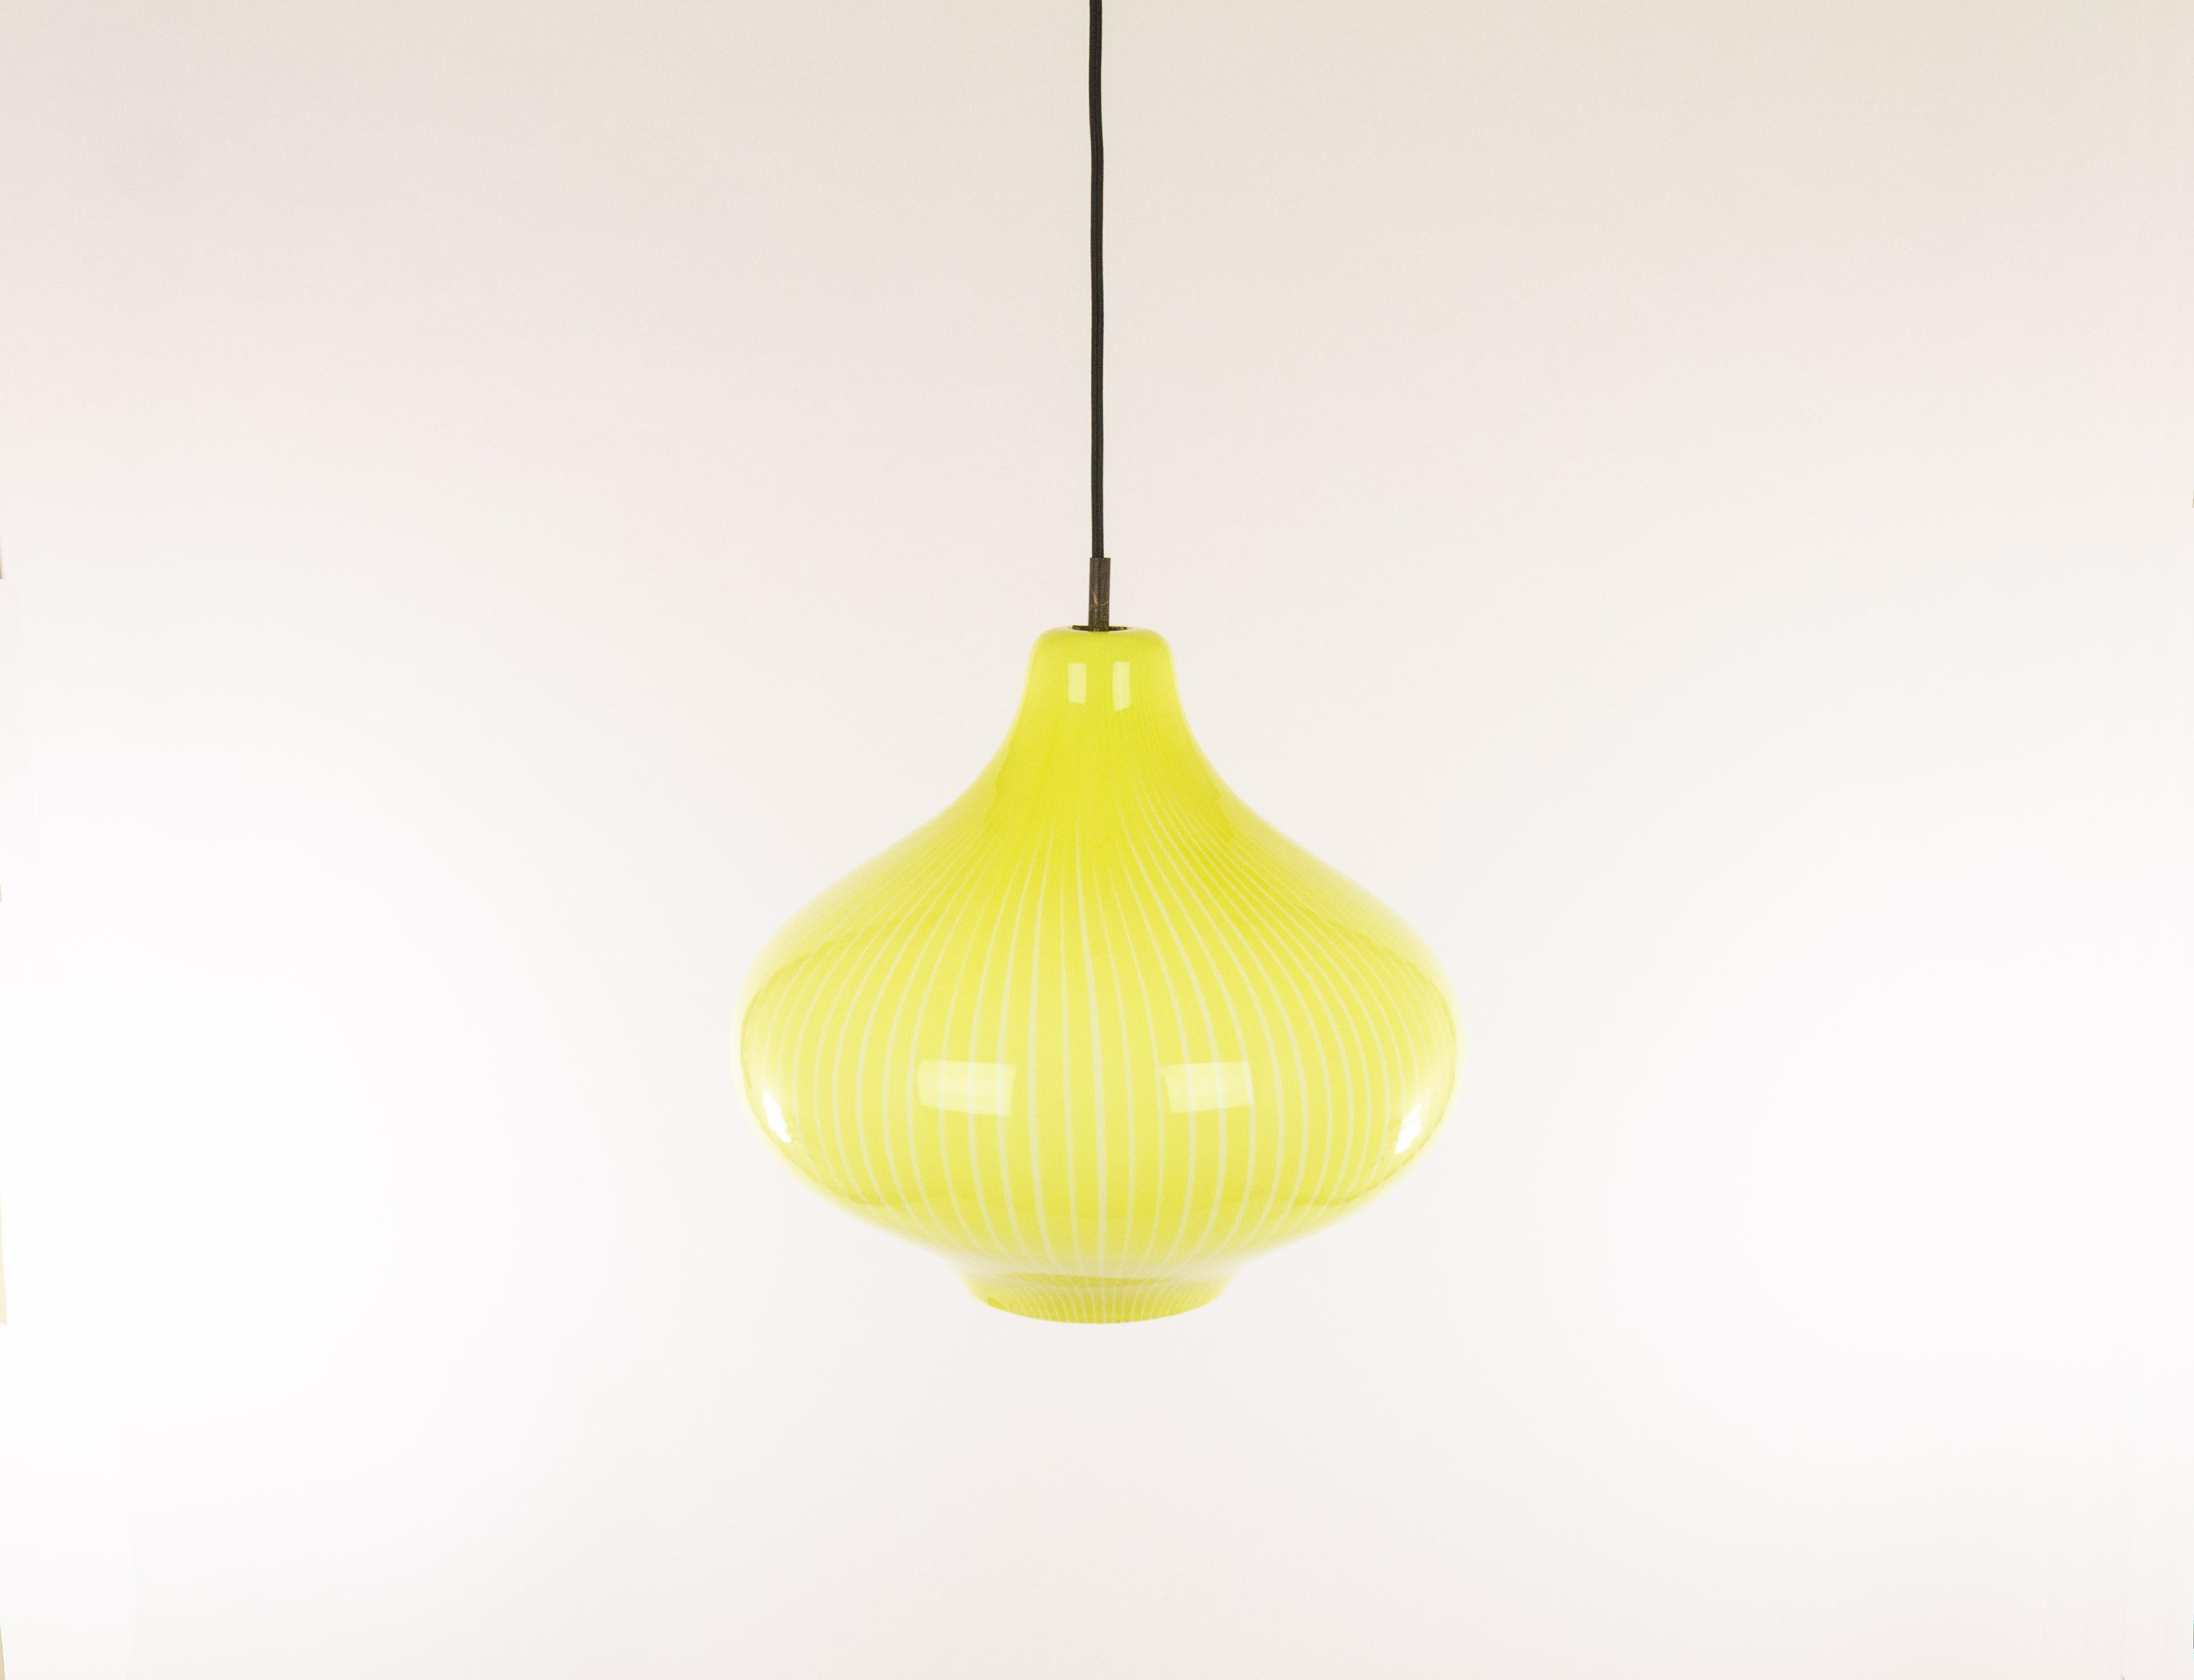 Yellow Cipolla pendant designed by Massimo Vignelli at the start of his impressive career in design and executed by Murano glass specialist Venini. This model has been produced in two different sizes, this is the smaller version with a diameter of